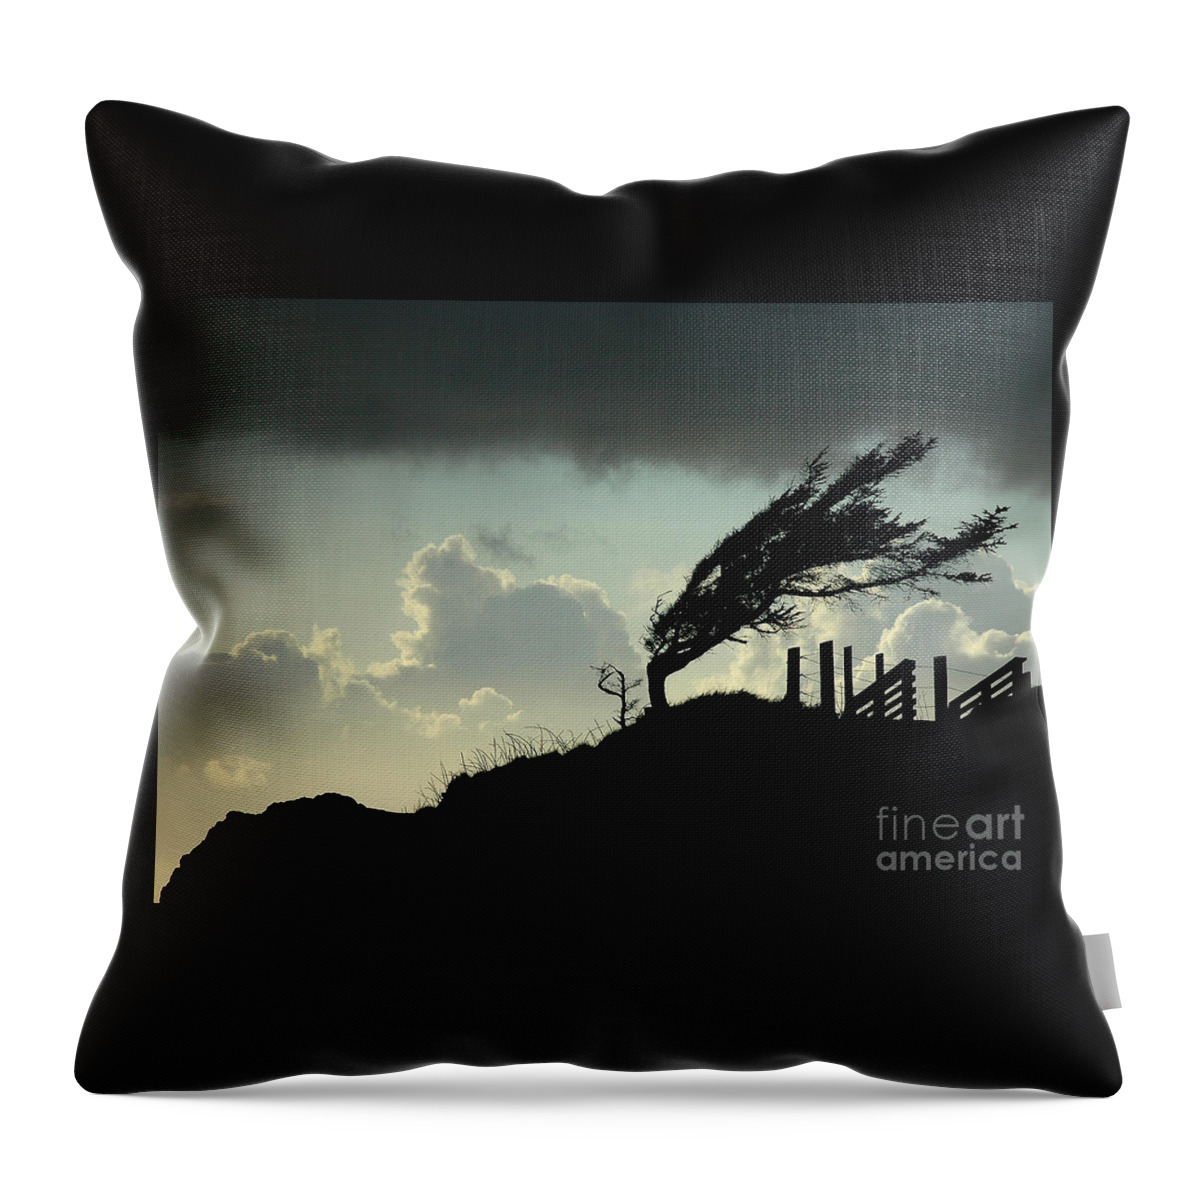 Pacificnorthwest Throw Pillow featuring the photograph The Test Of Time by Nick Boren